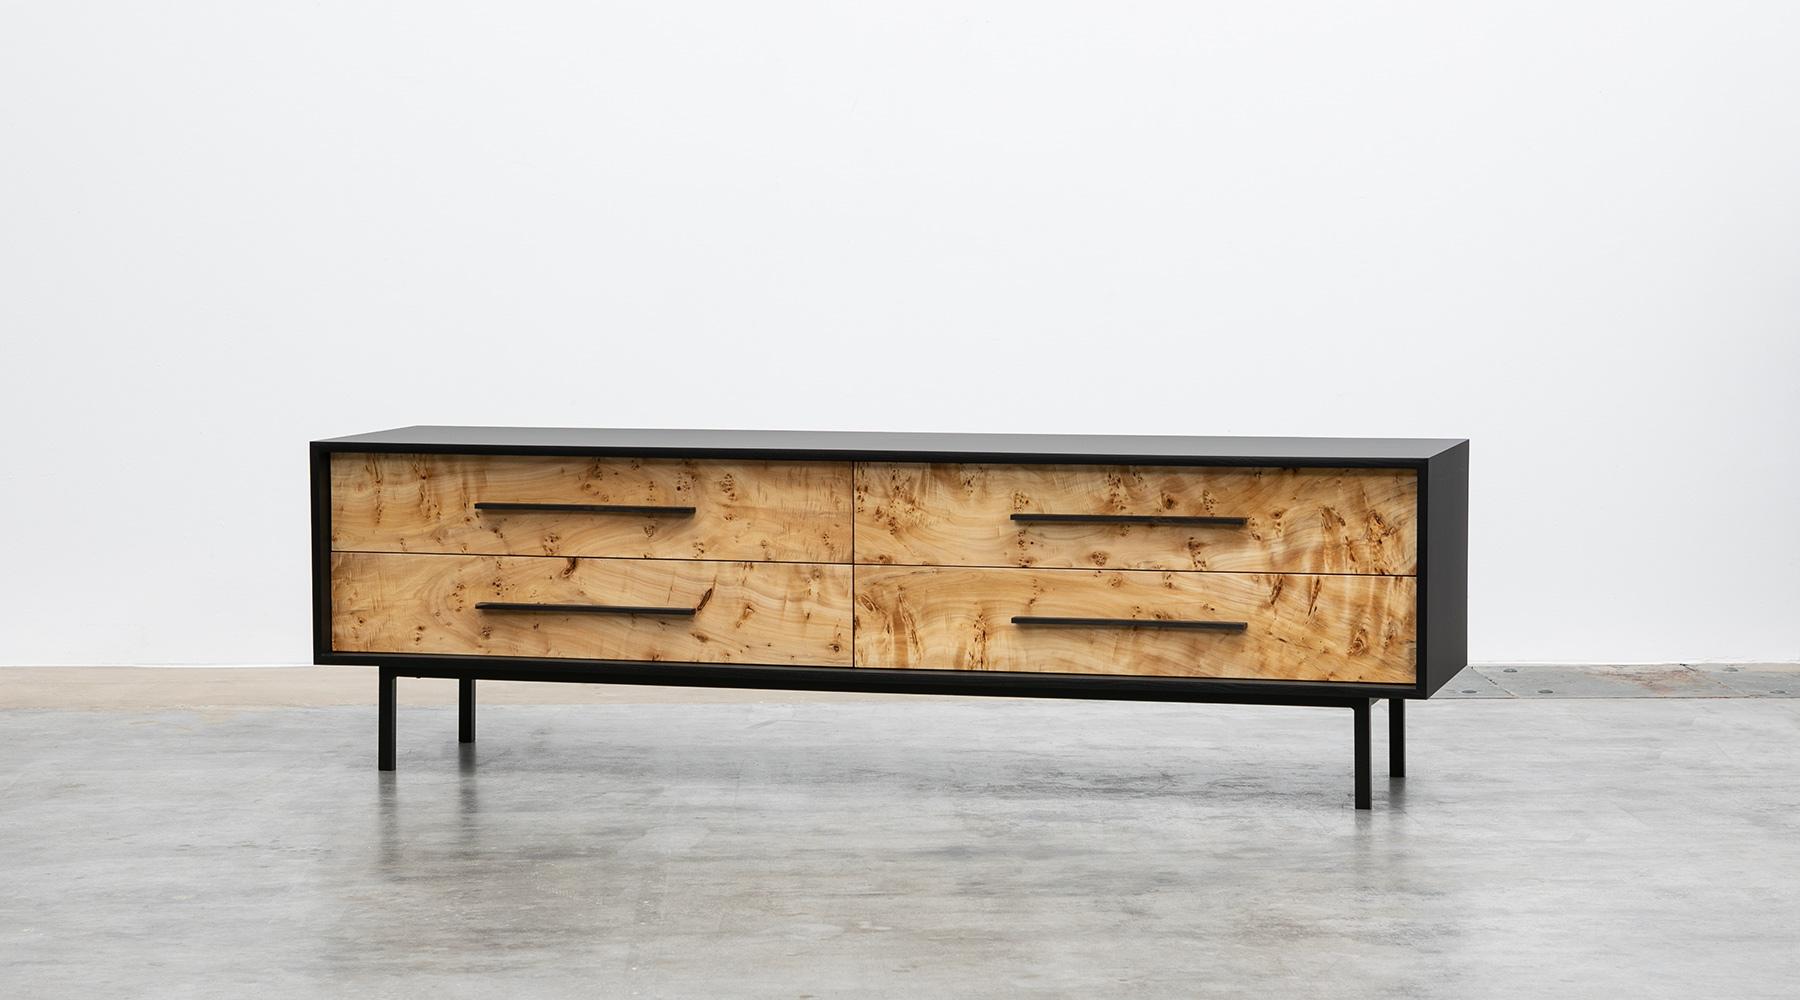 Sideboard by contemporary German artist Johannes Hock. The front of the doors of this unique piece comes in poplar burl wood with ebony handles. The inside life of the four drawers are designed with red or black HPL, as well as the backside.